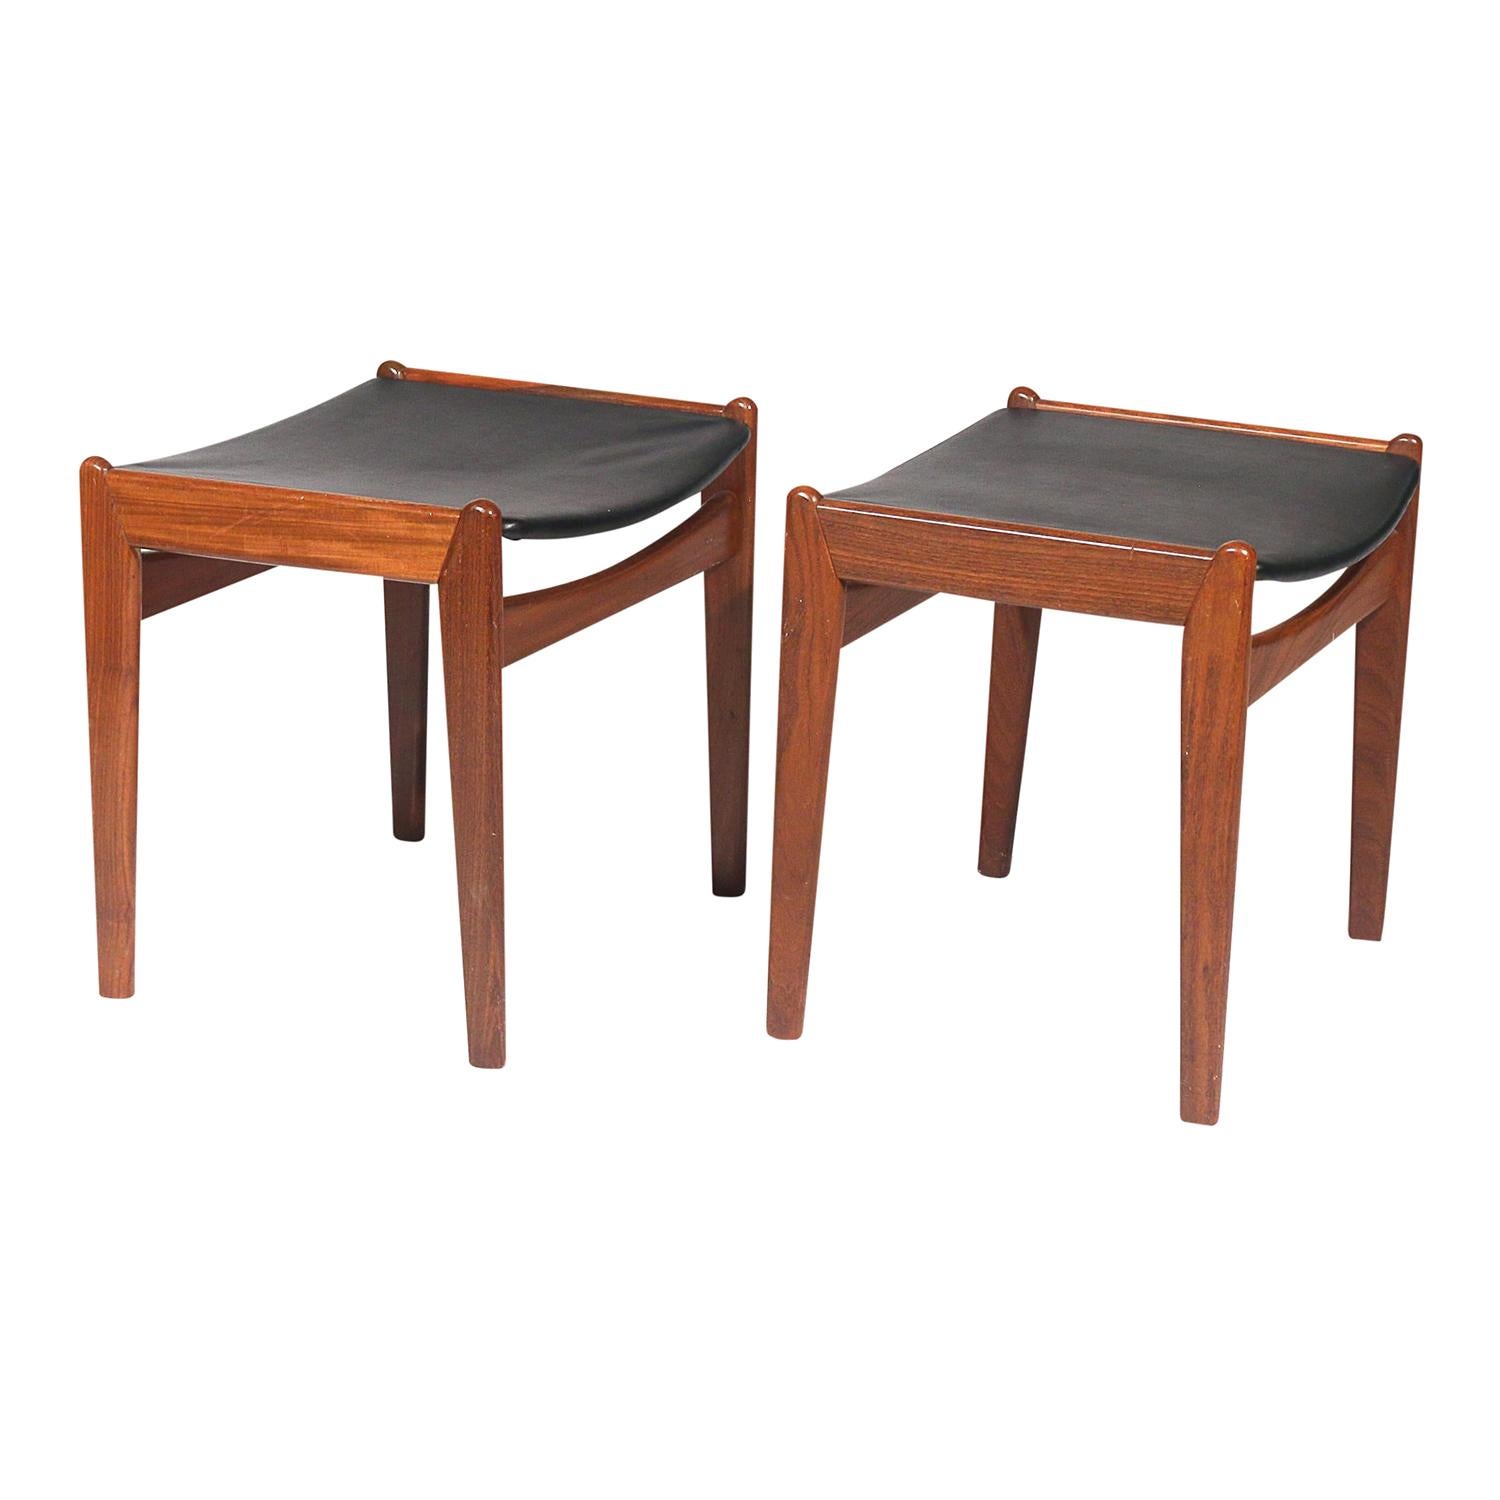 A dark-brown, vintage Mid-Century Modern American pair of footstools made of hand crafted Teakwood in good condition. One of them has still underneath of the seat cover an old label attached of the department store Bloomingdale's. The black vinyl